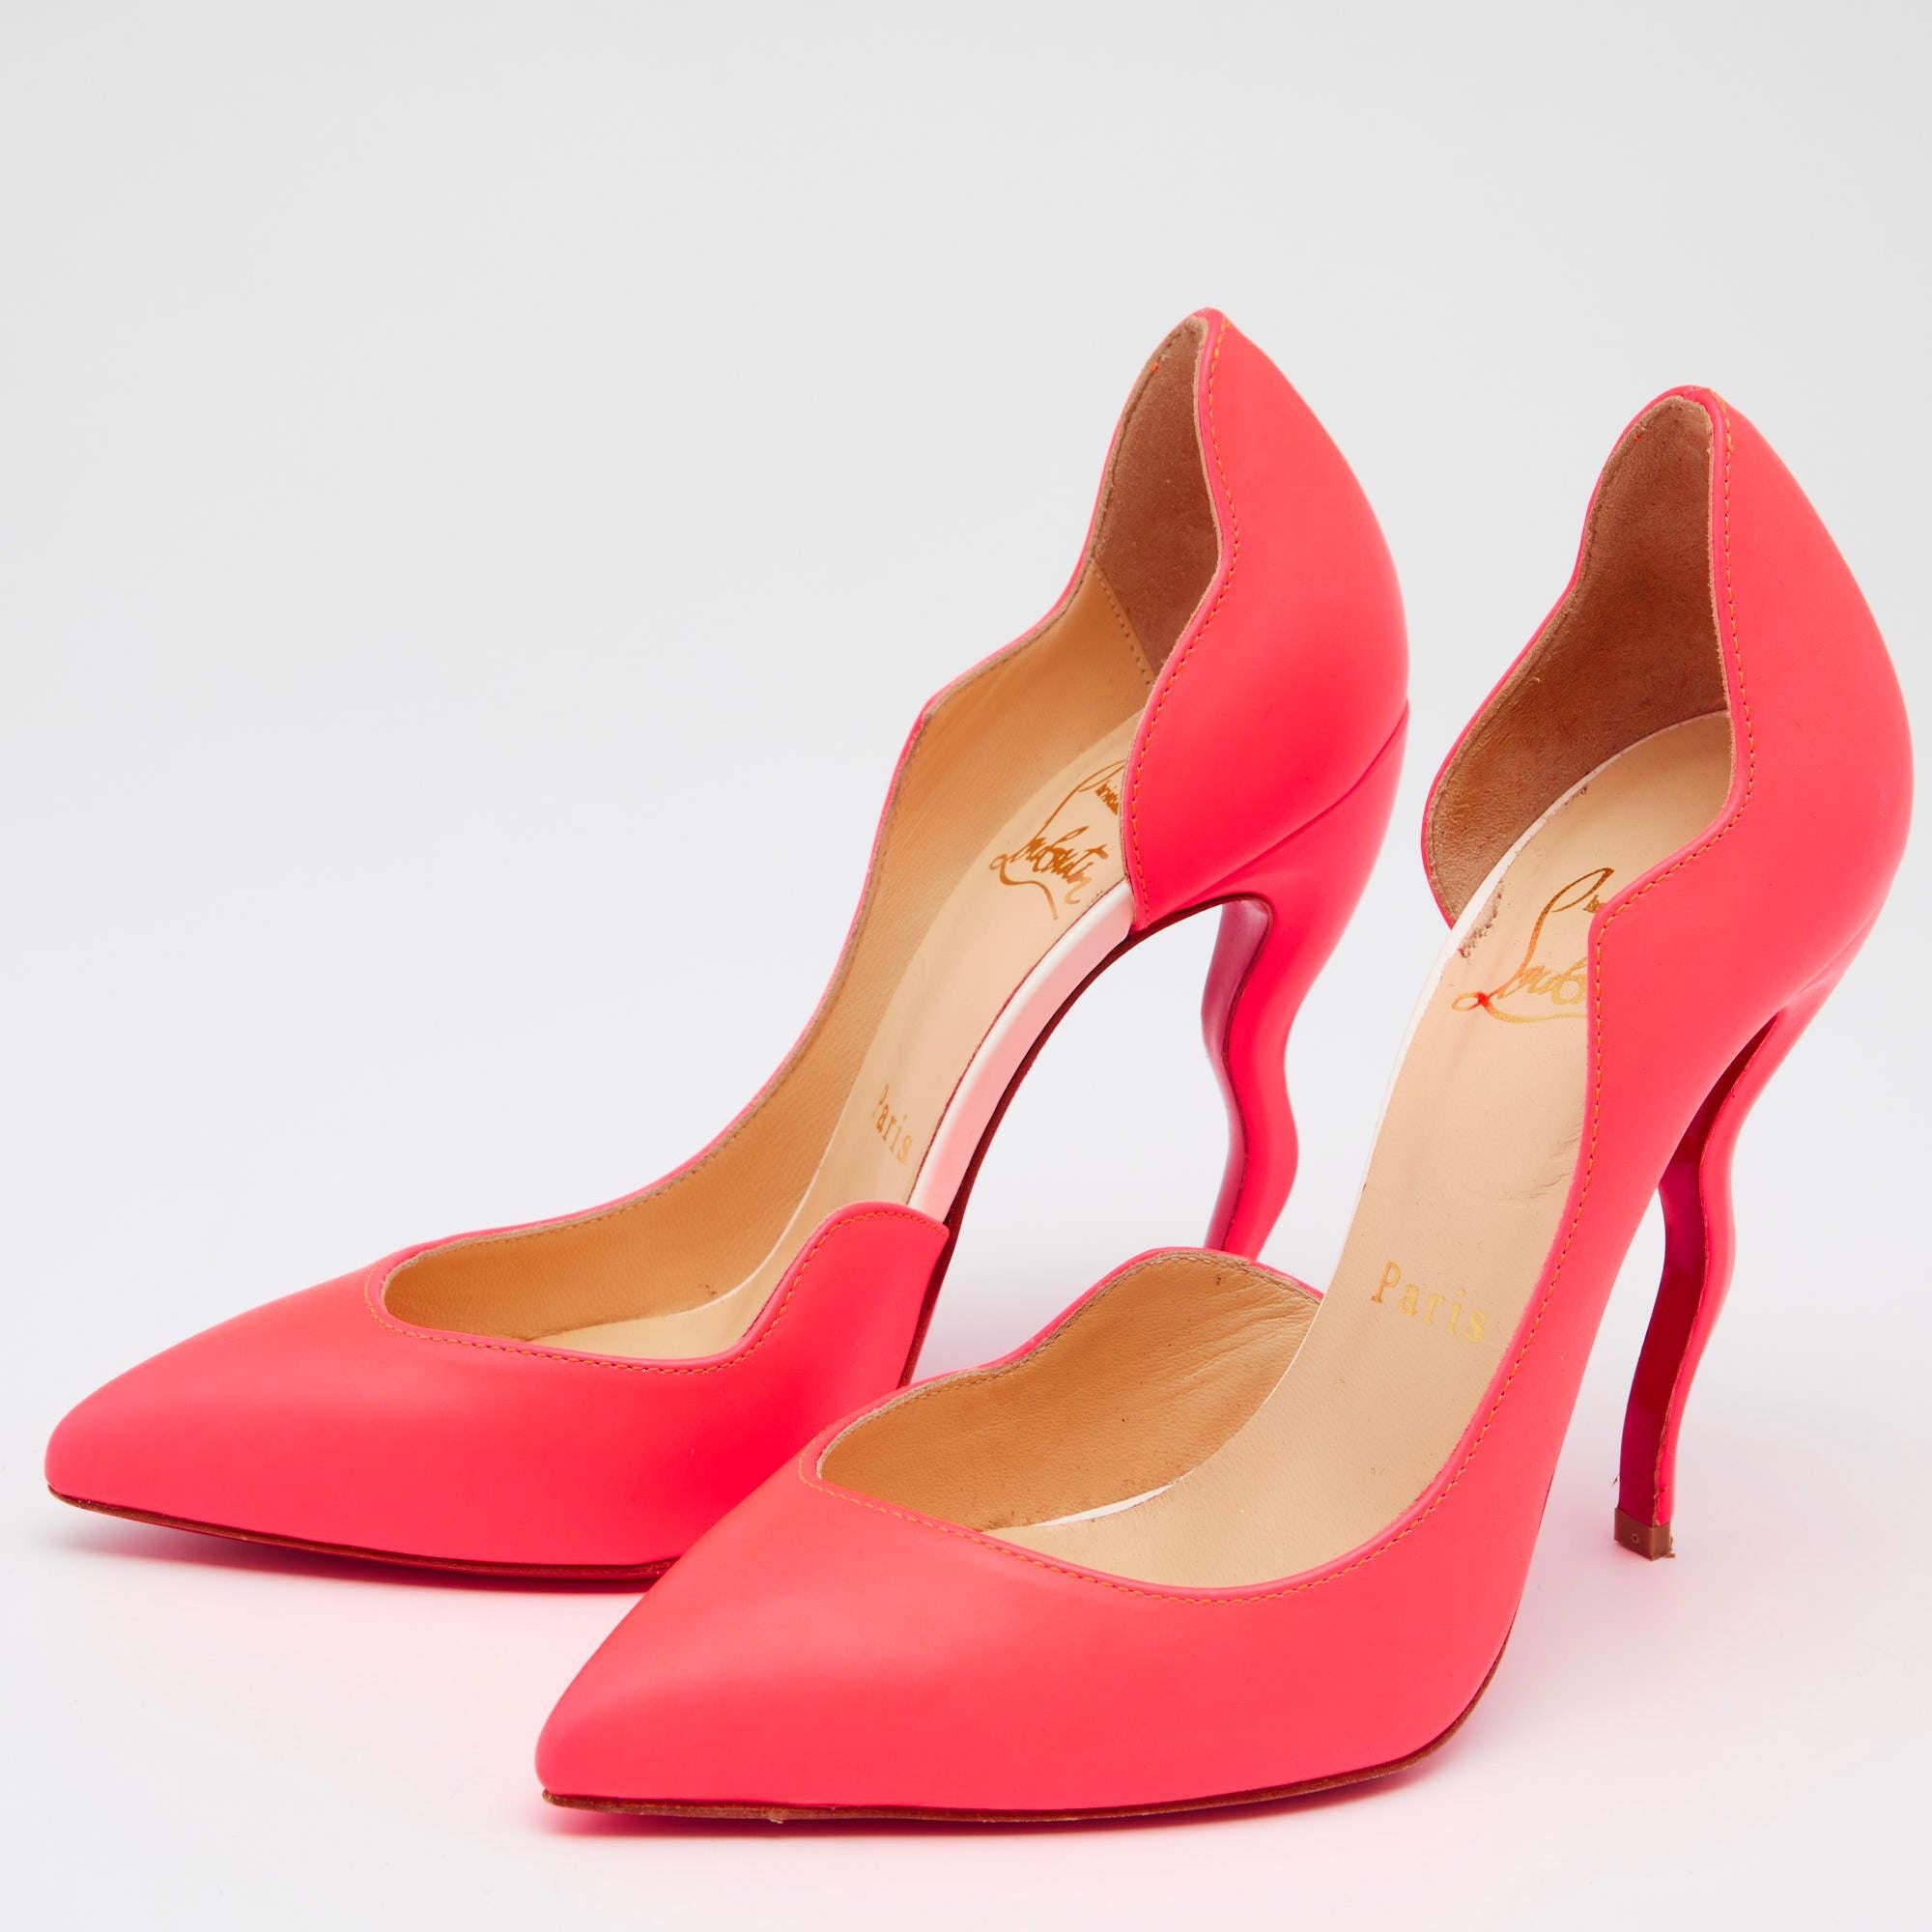 Bound to make you feel magical in every walk are these Dalida pumps from Christian Louboutin, beautifully shaped in a D'Orsay style. They have been designed with a wavy topline and wavy 11 cm heels, complementing the pointed toes and the